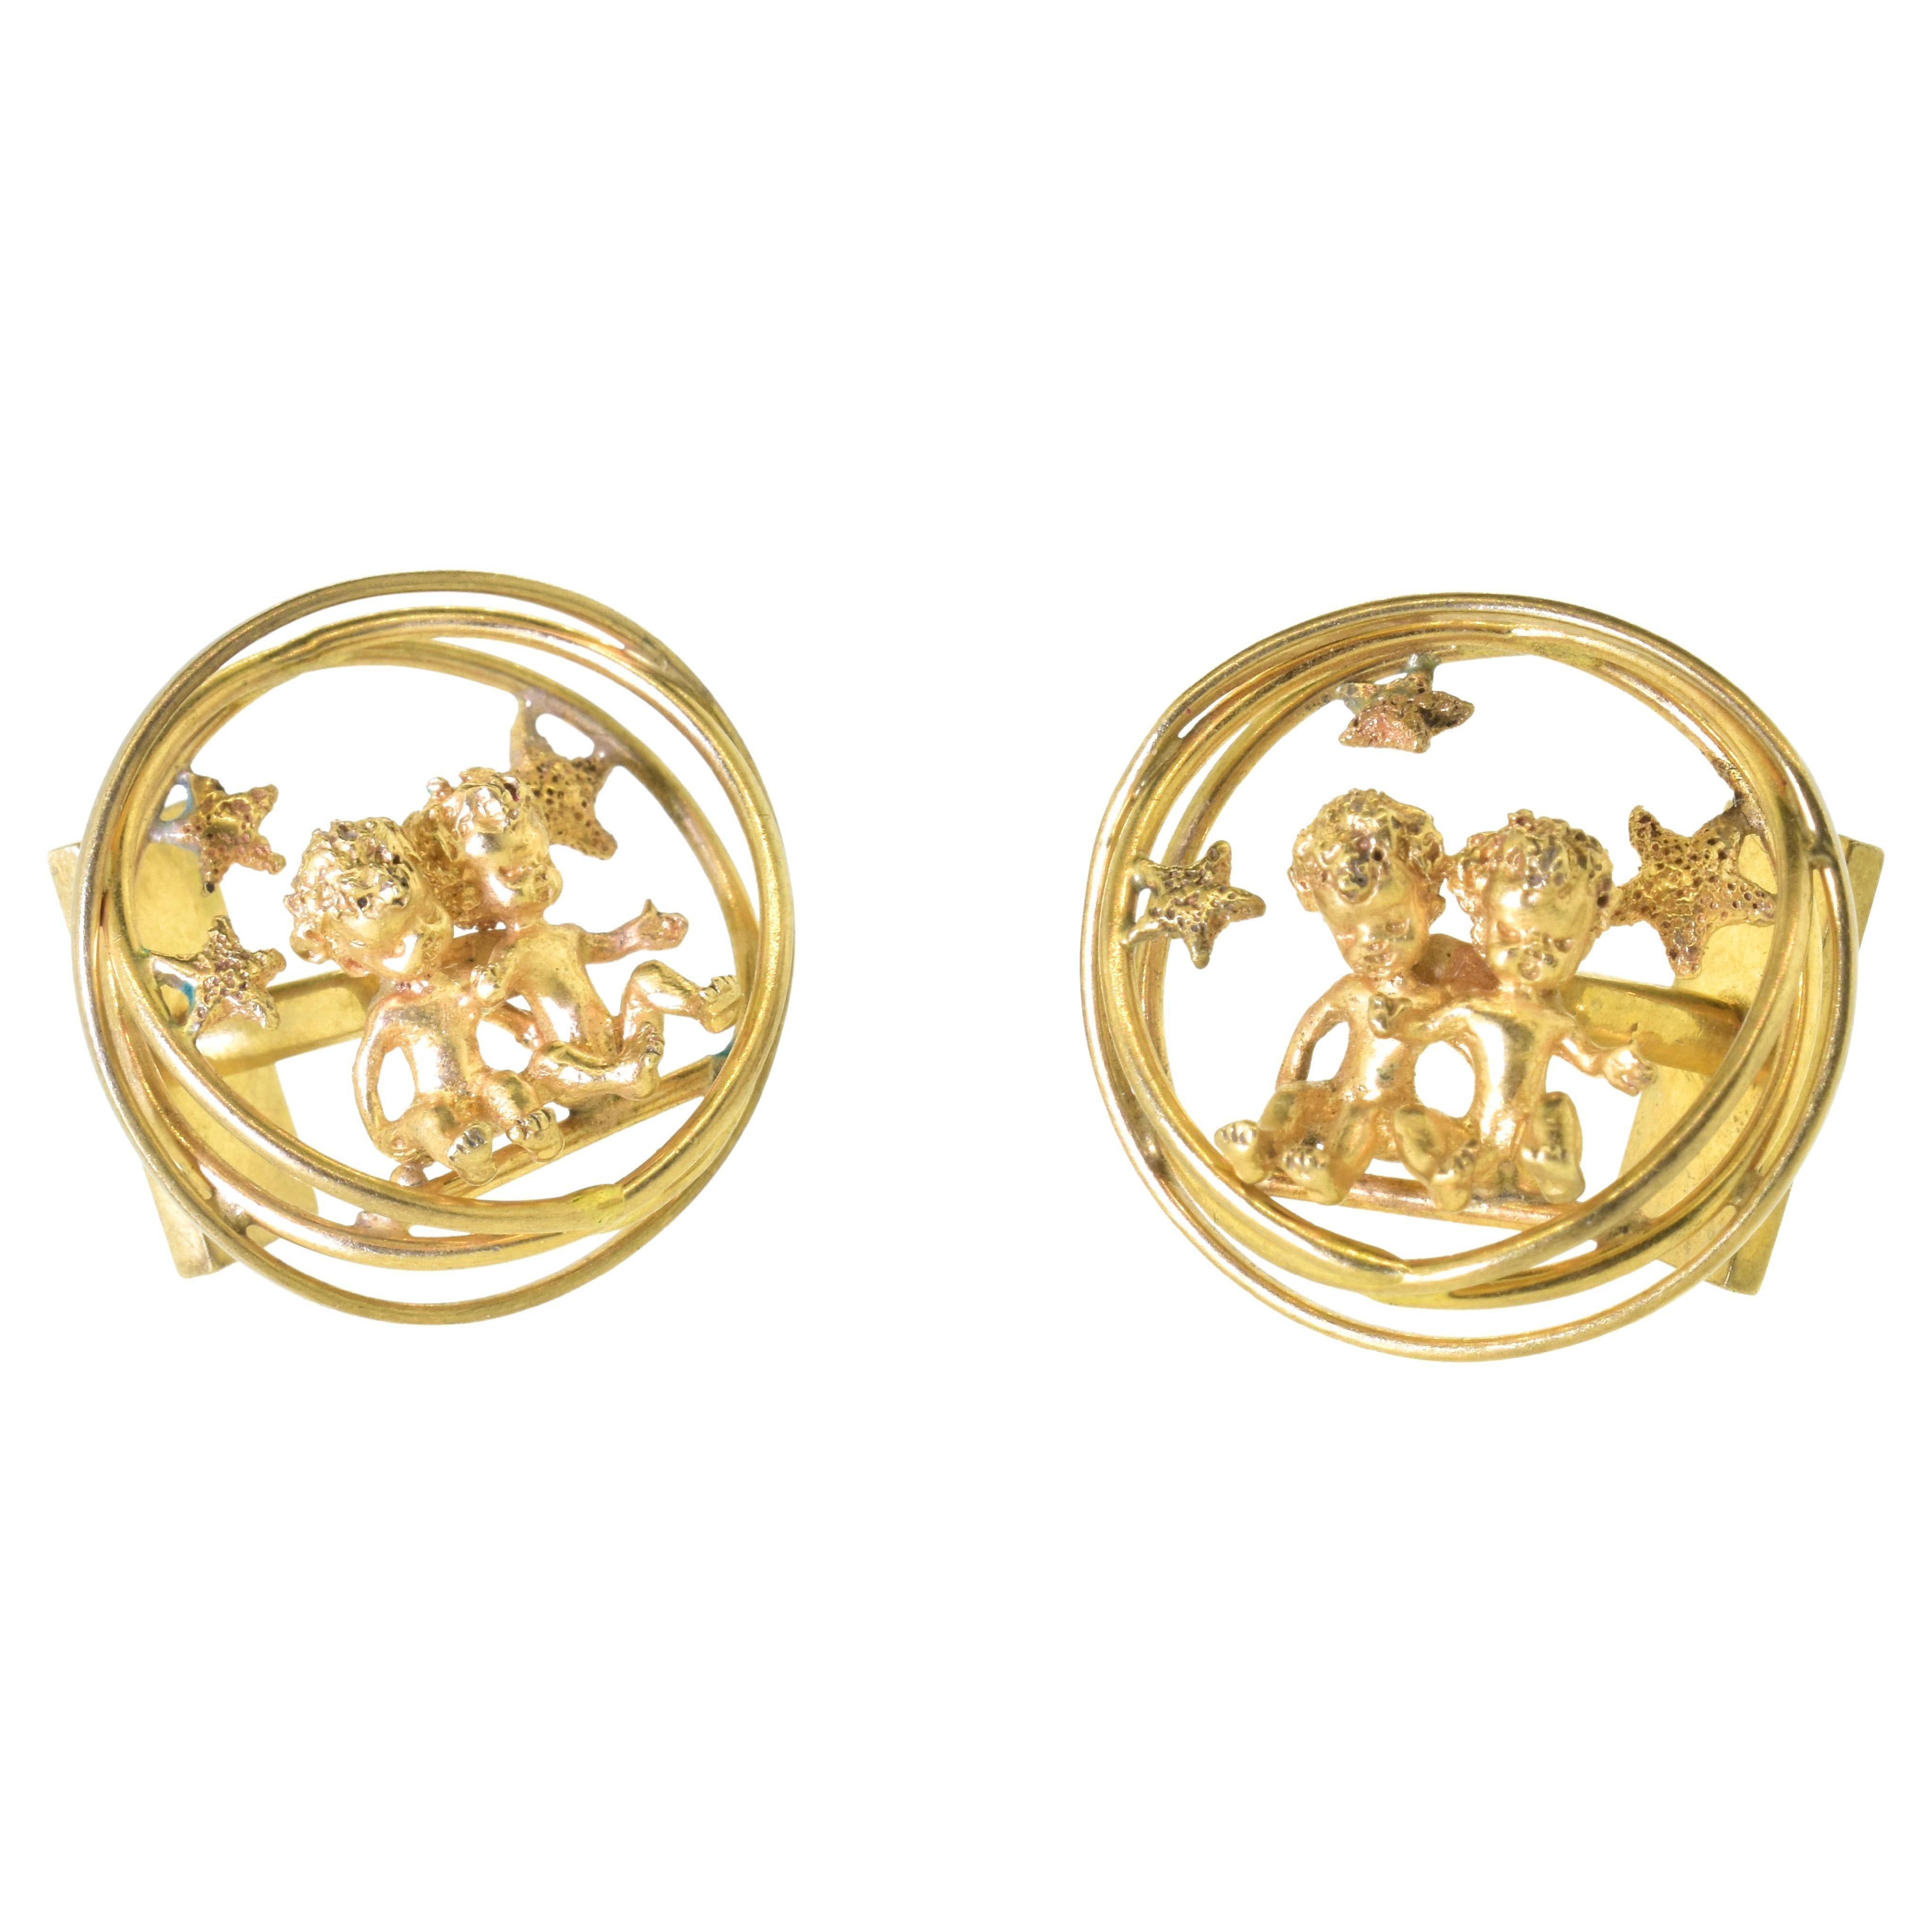 Yellow Gold Amusing Motif Cufflinks by the famous American designer Ruser, 1955 For Sale